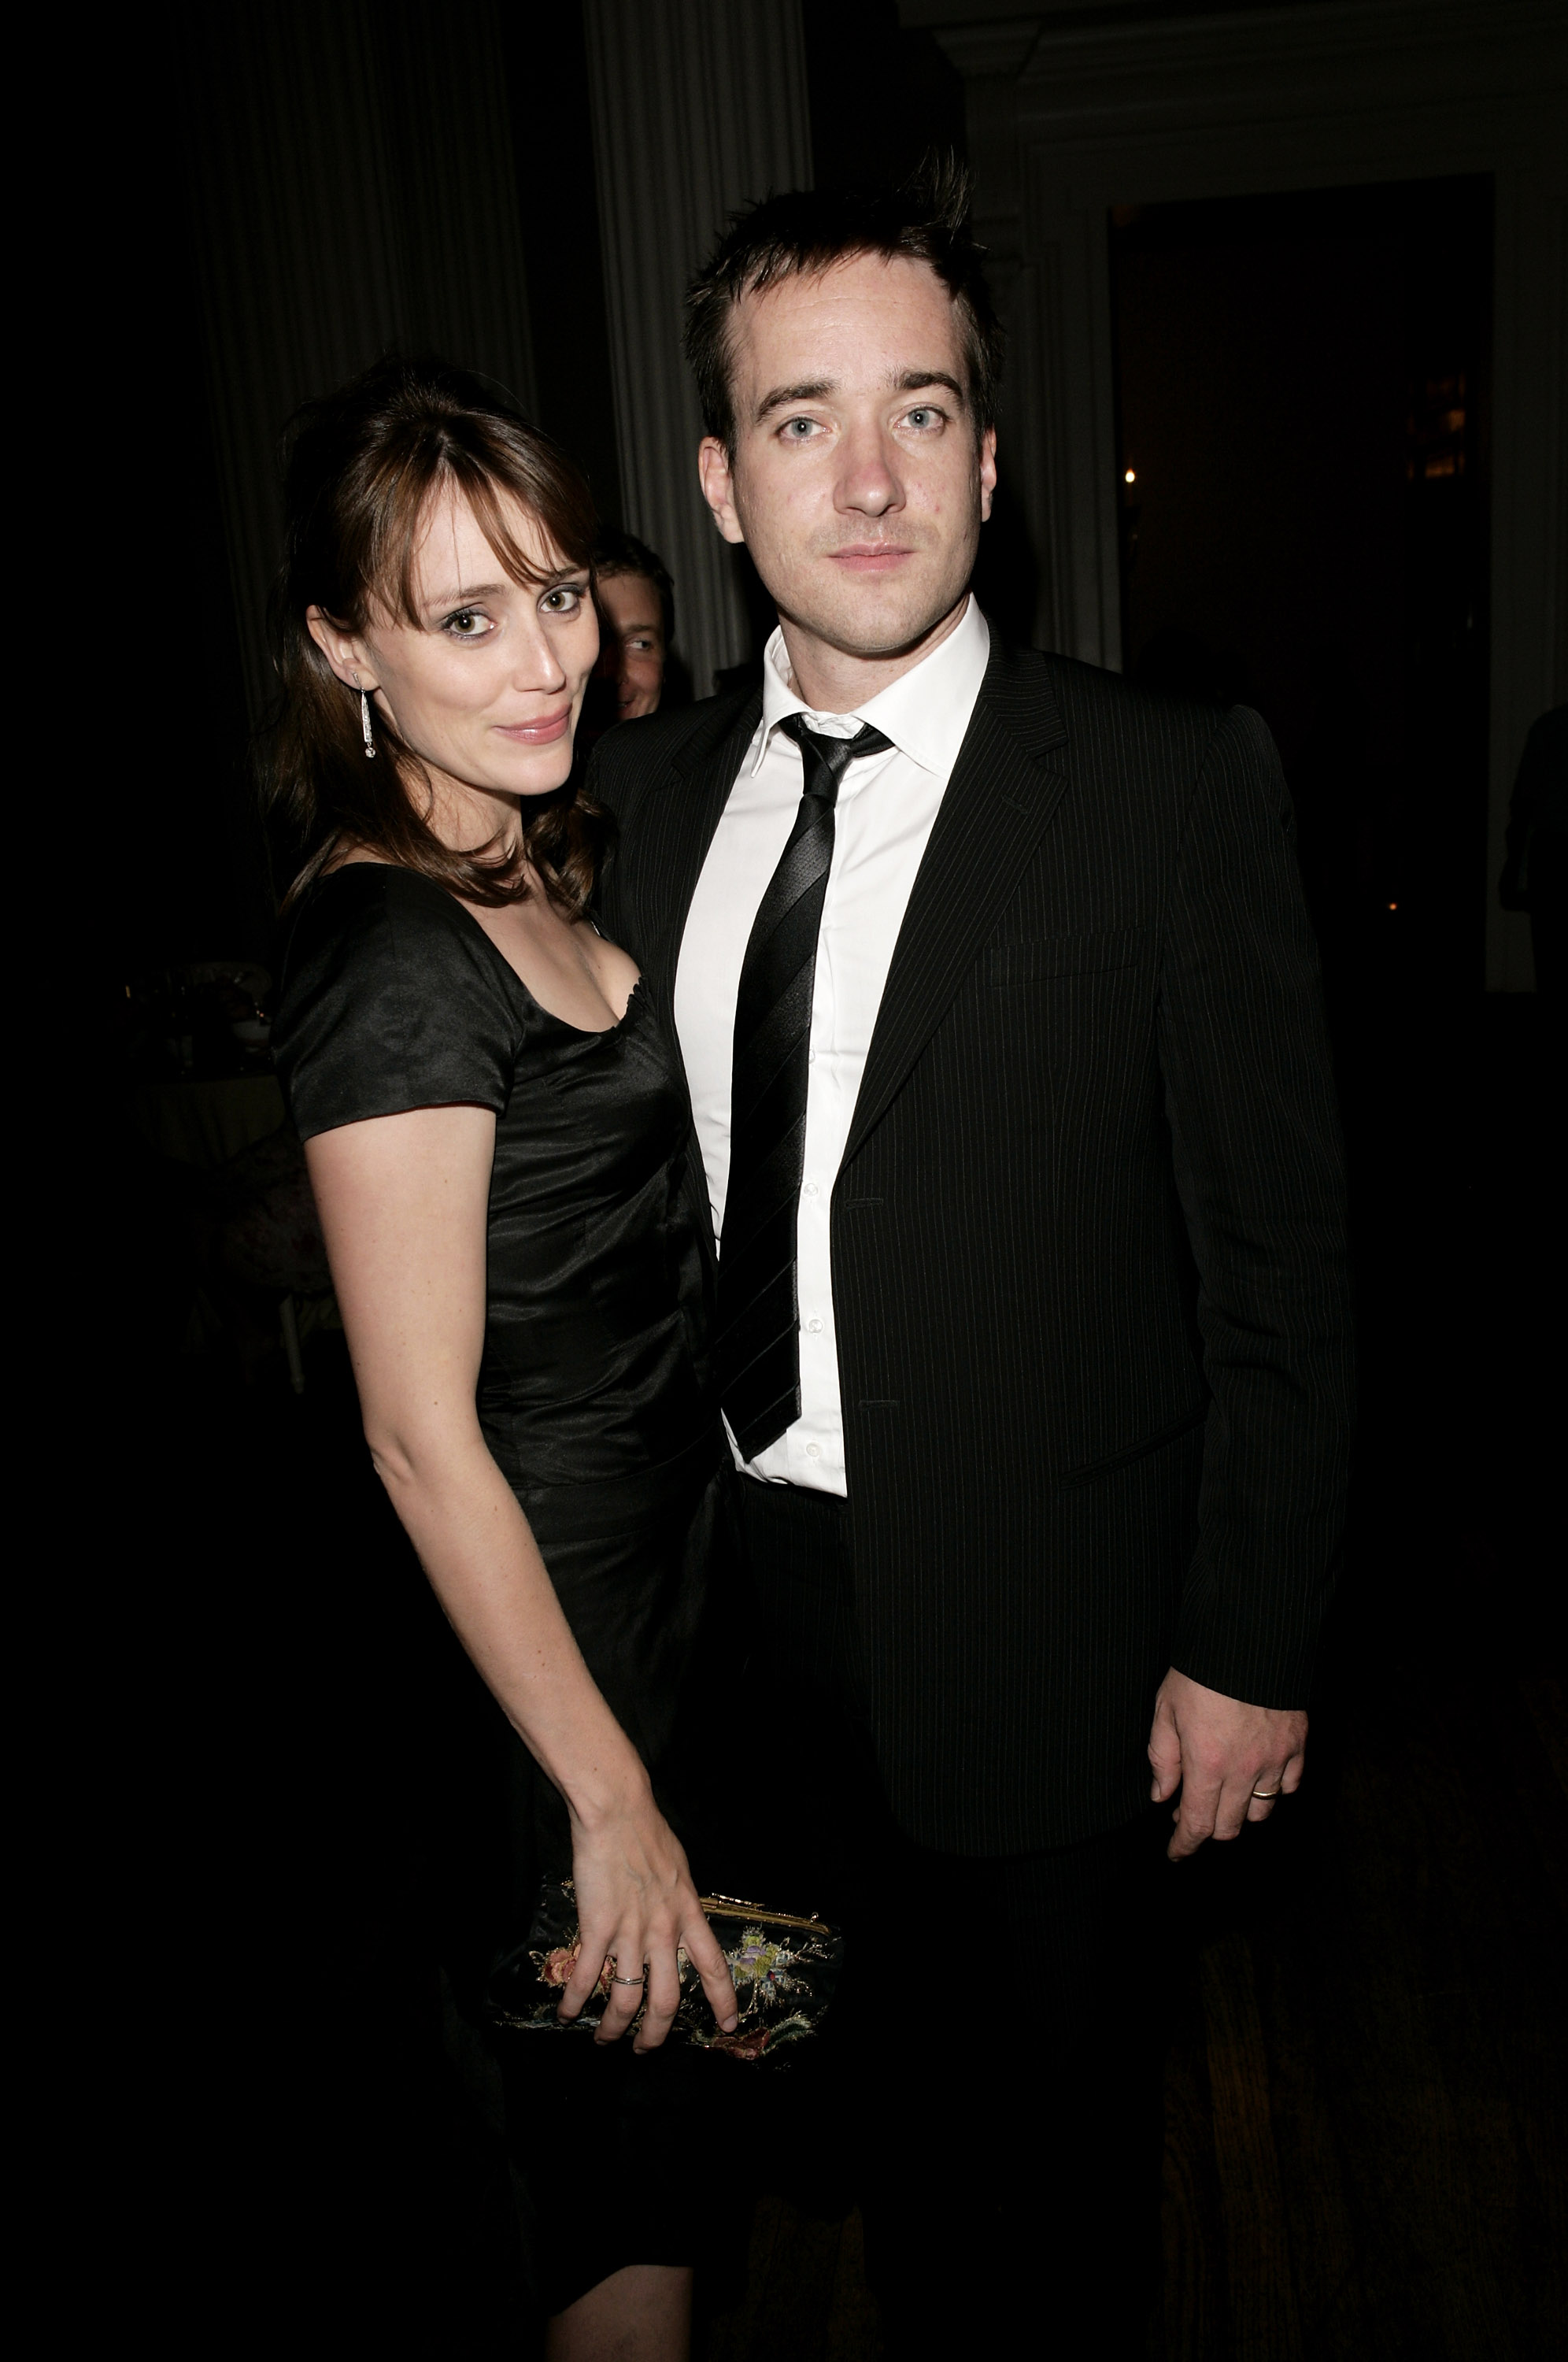 Keeley Hawes and Matthew Macfadyen attend the aftershow party following the UK Premiere of 'Pride & Prejudice' at The Banqueting Hall, Whitehall, on September 5, 2005, in London, England. | Source: Getty Images